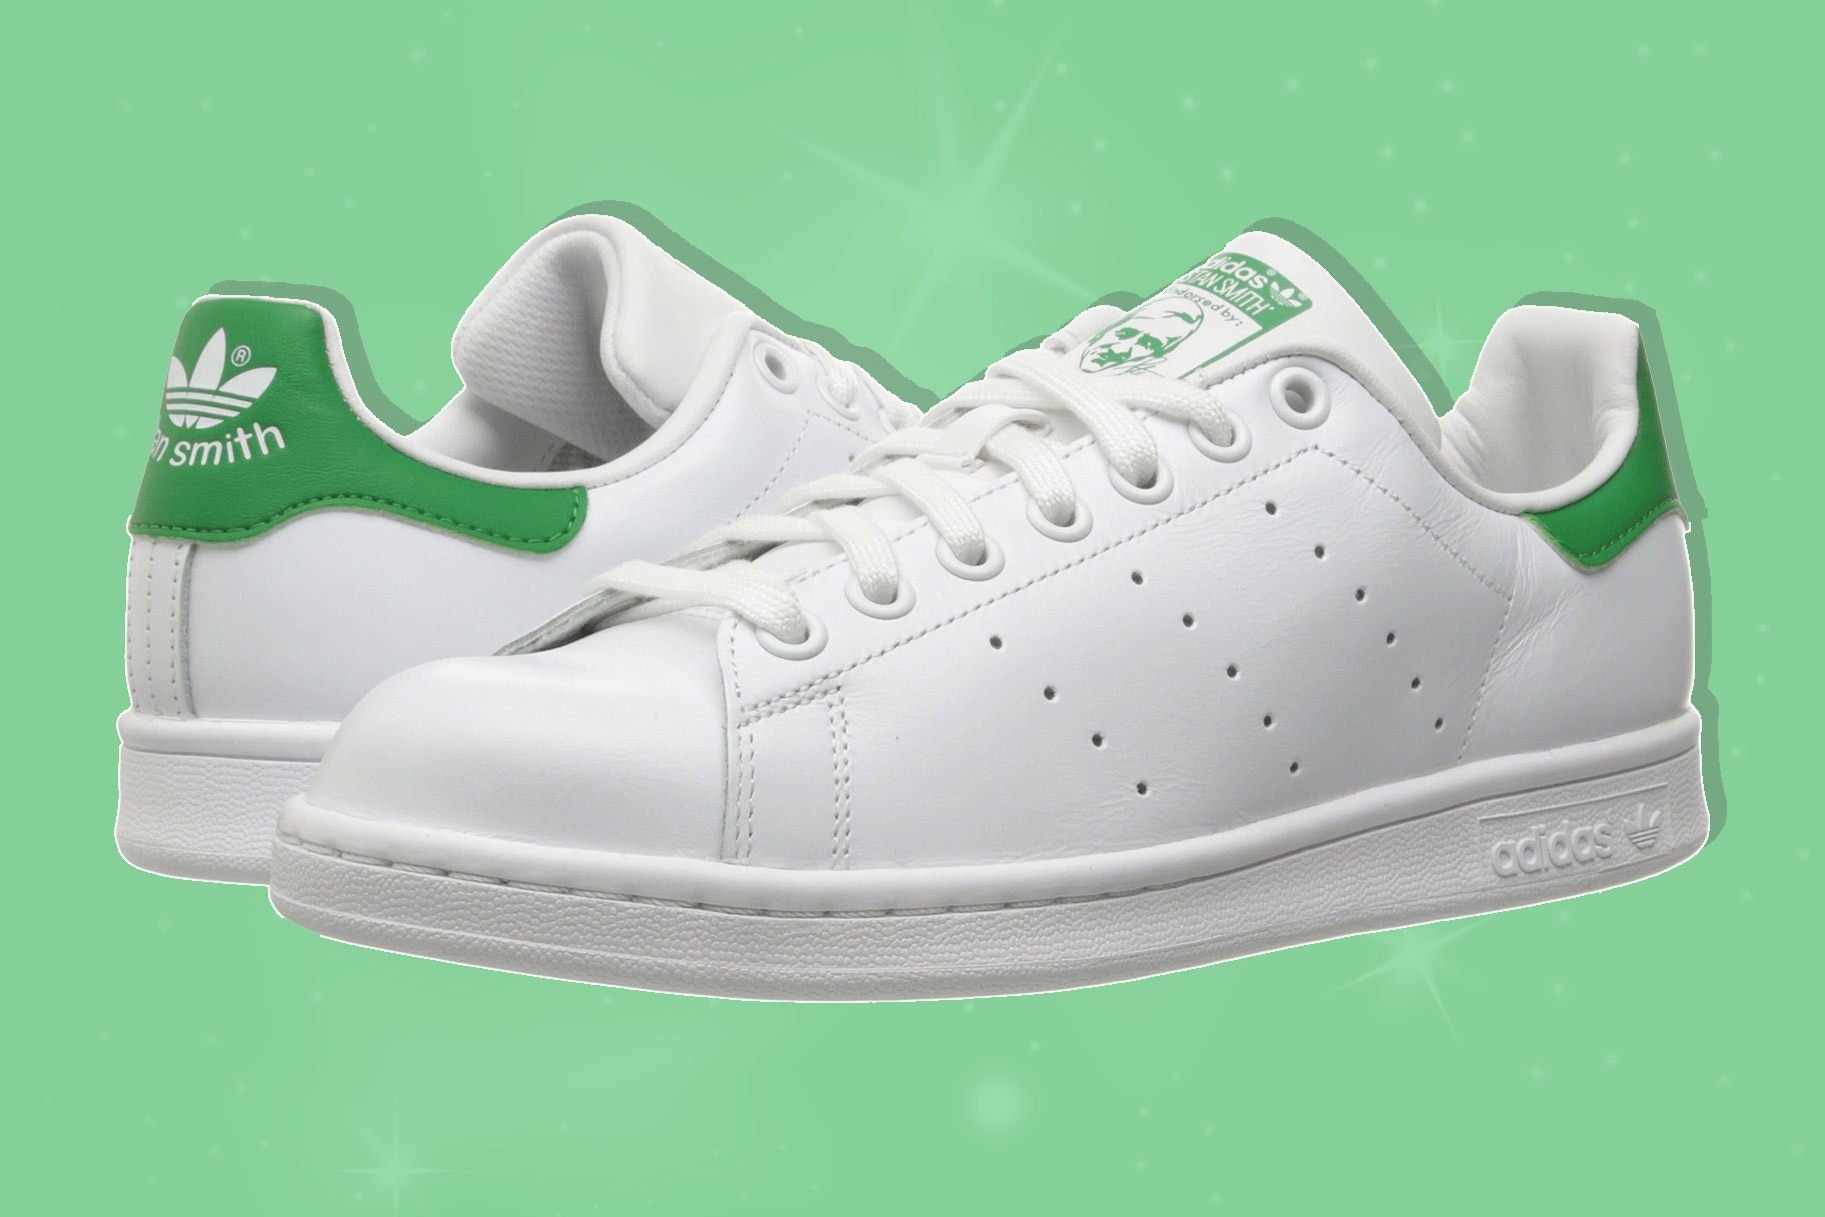 stan smith look alike shoes